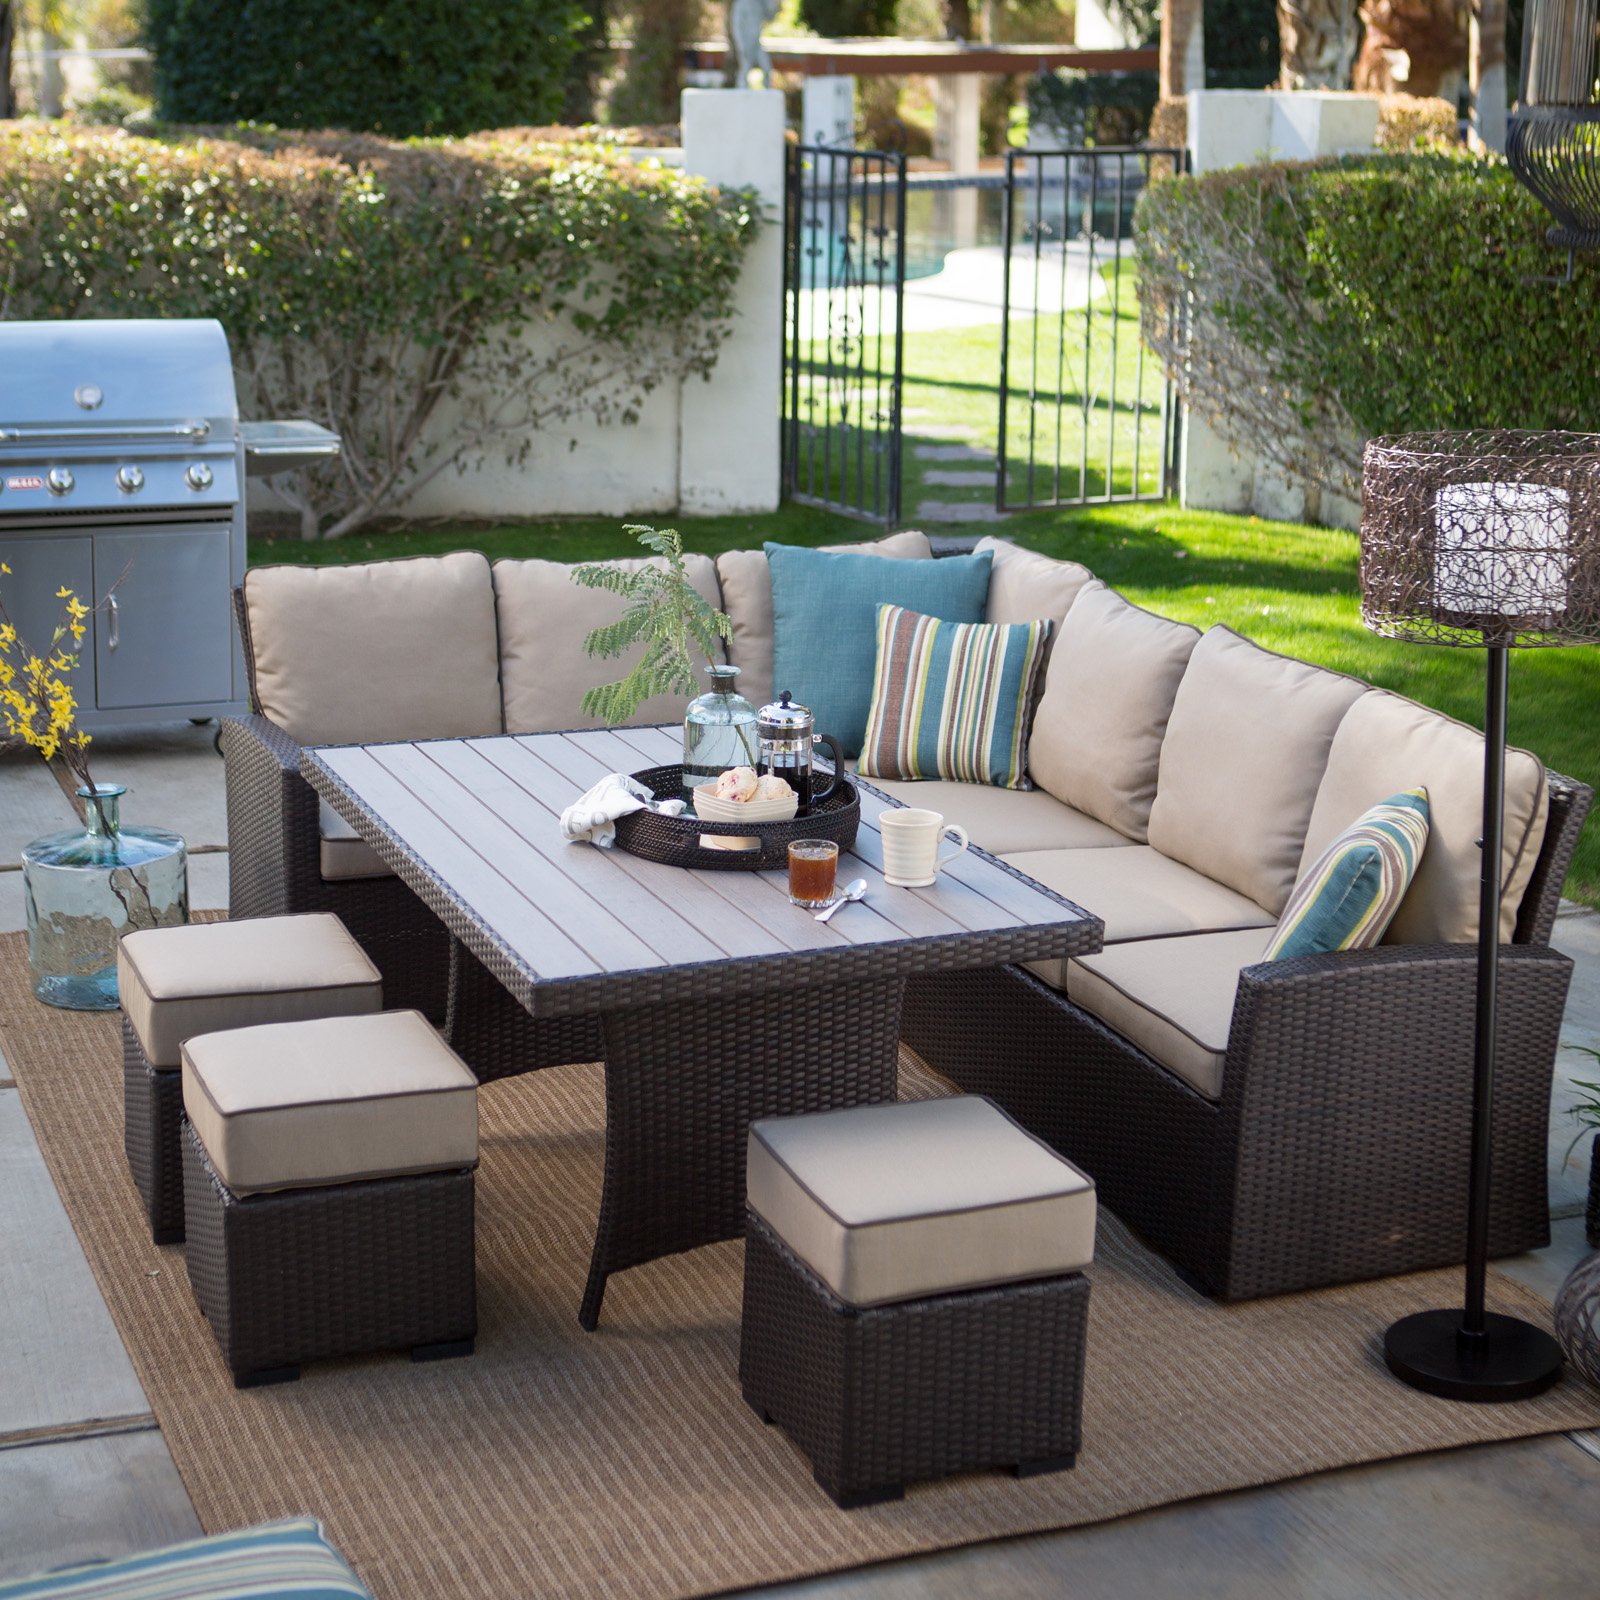 Belham Living Monticello All-Weather Wicker Sofa Sectional Patio Dining Set